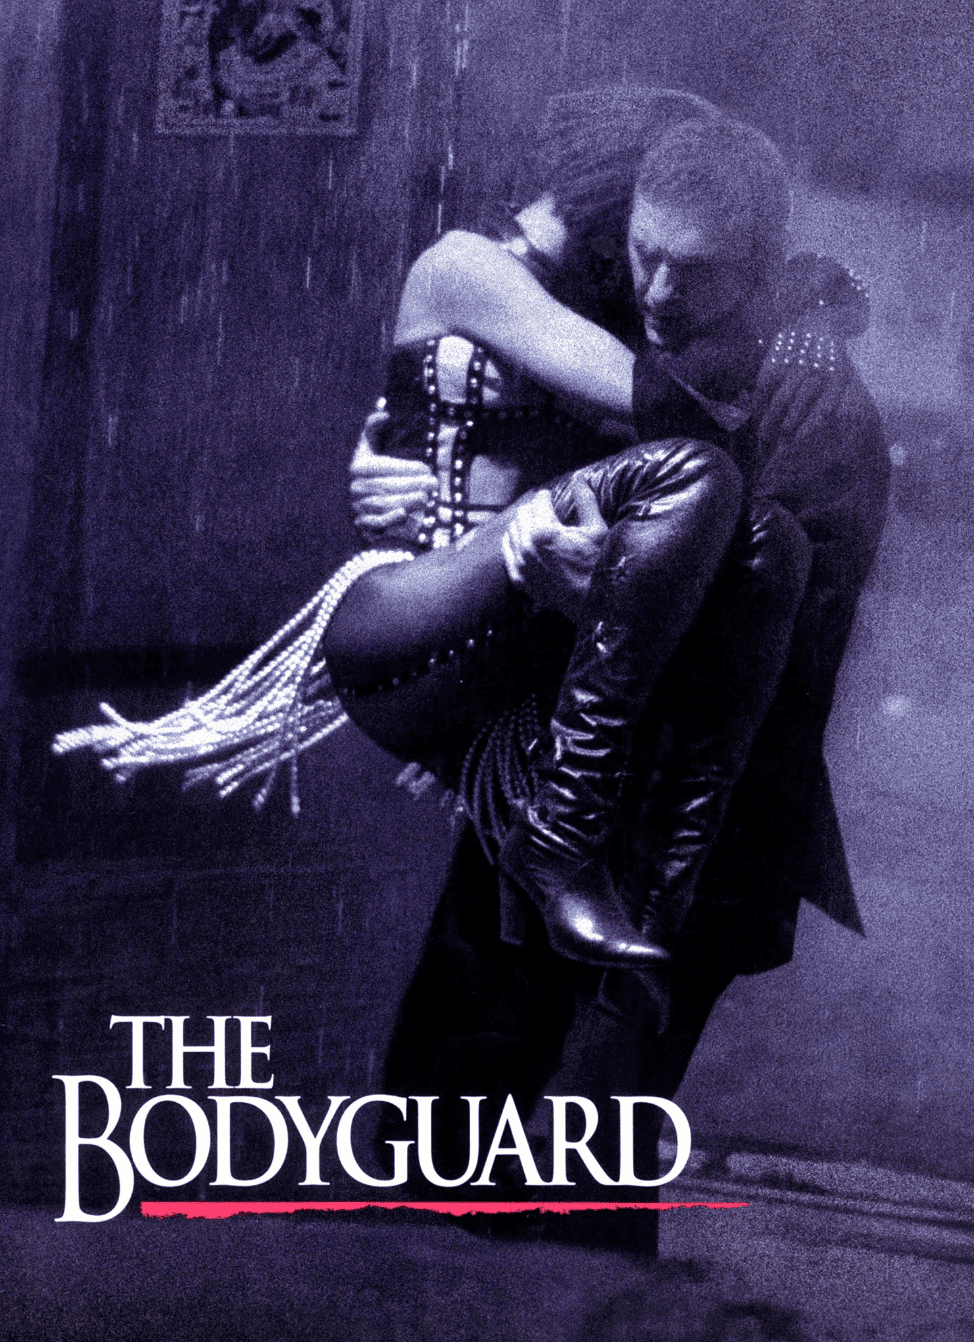 The iconic poster of the movie "The Bodyguard". | Source: Twitter/AndySignore